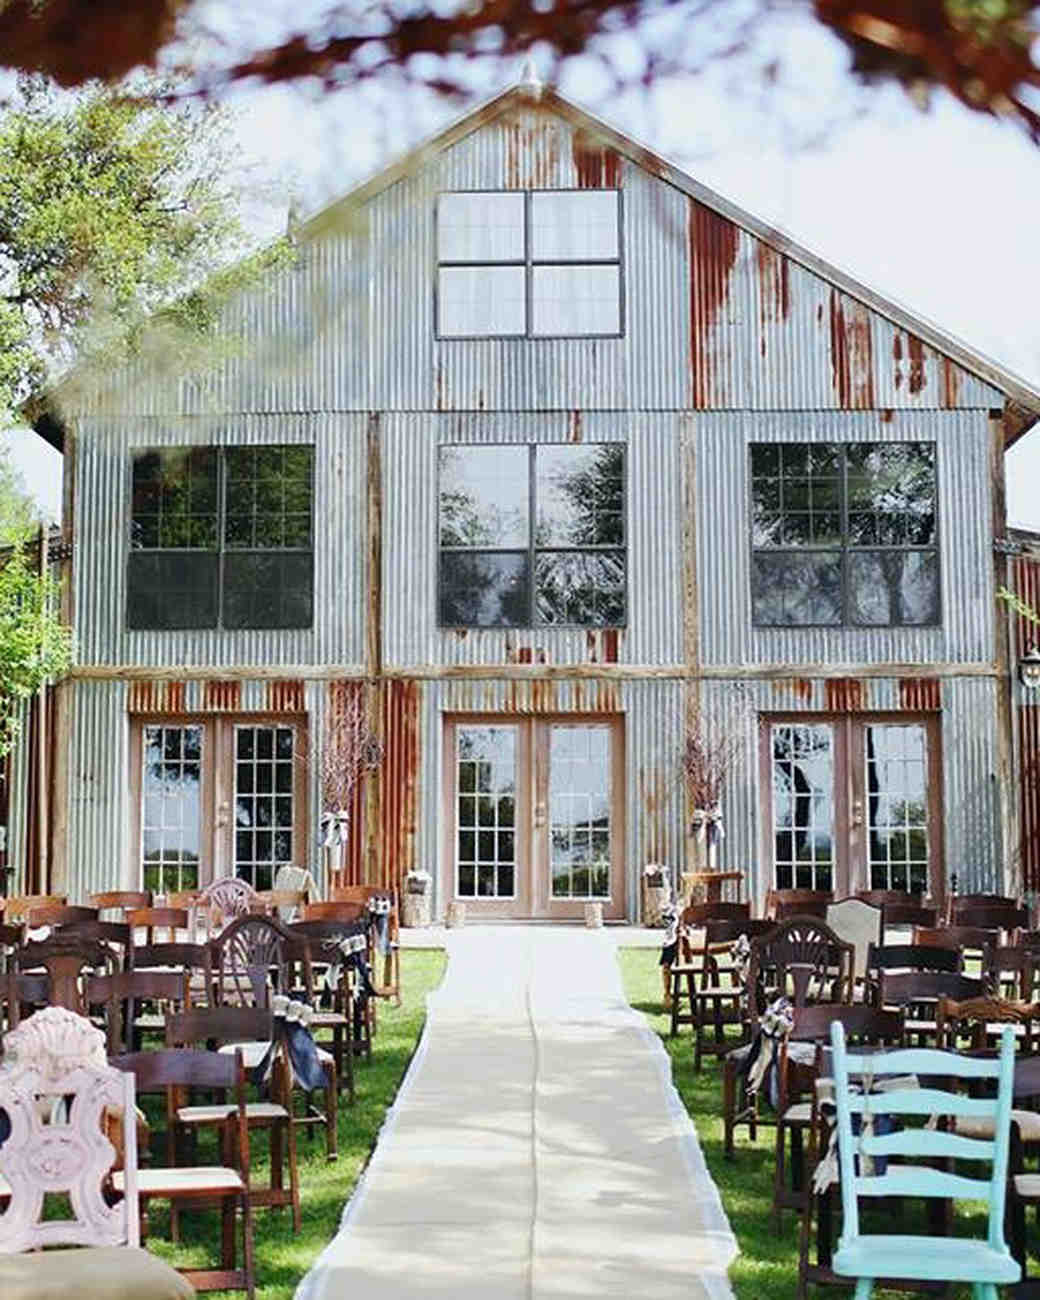 Wedding Ceremony Venues
 11 Rustic Wedding Venues to Book for Your Big Day